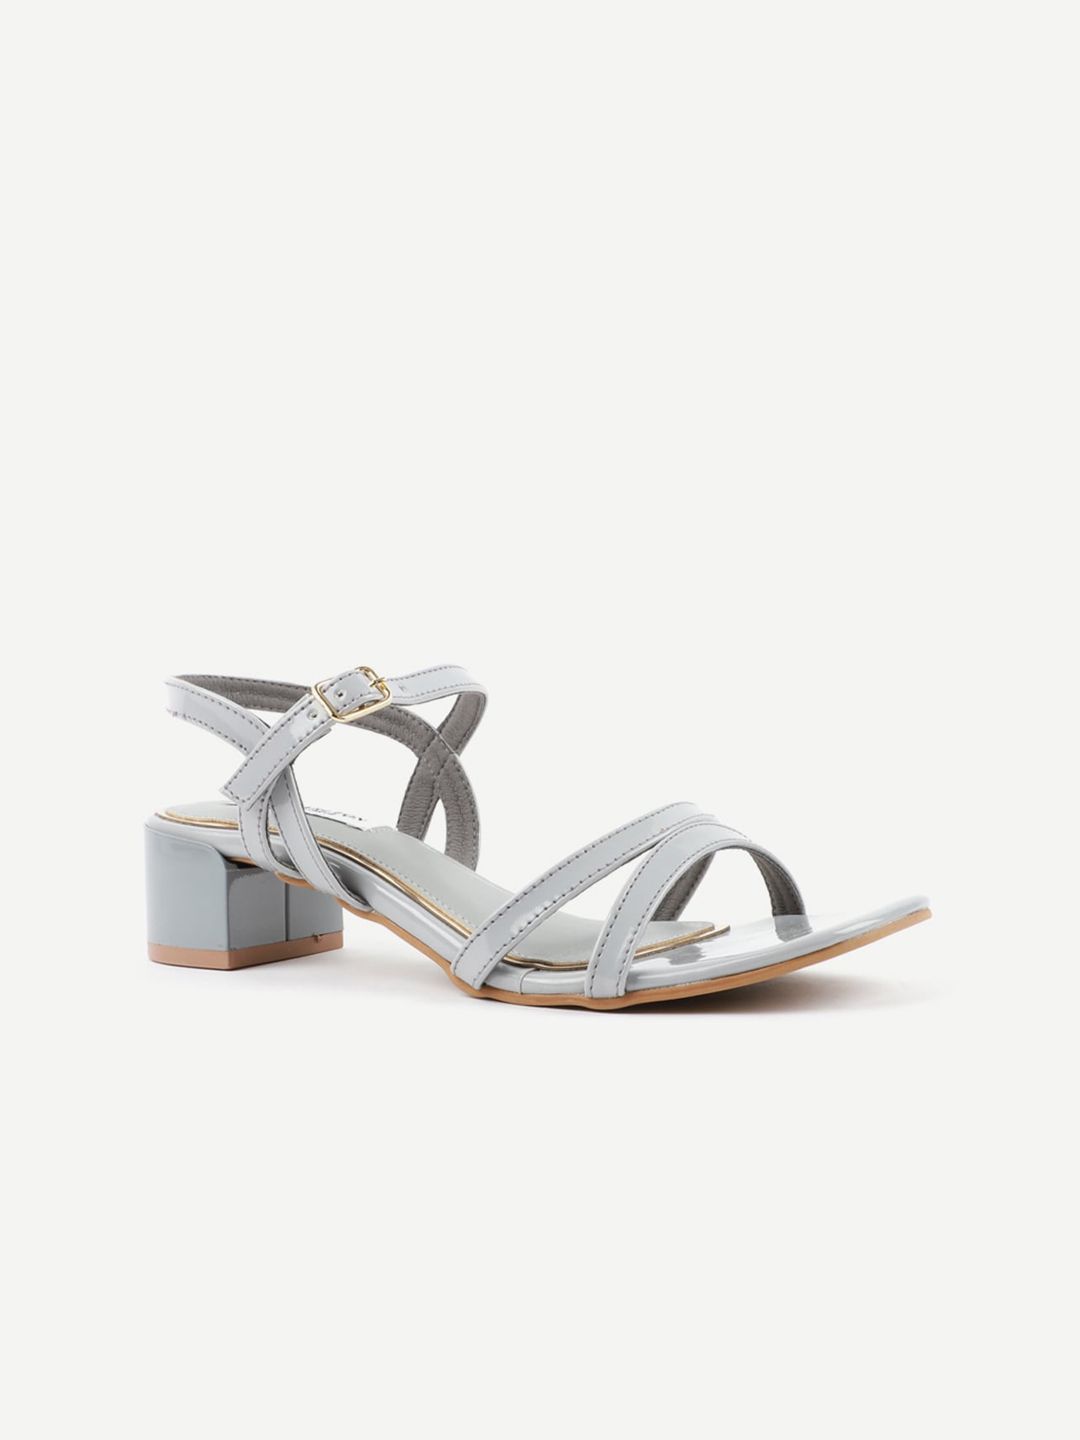 Carlton London Grey Block Sandals with Buckles Price in India